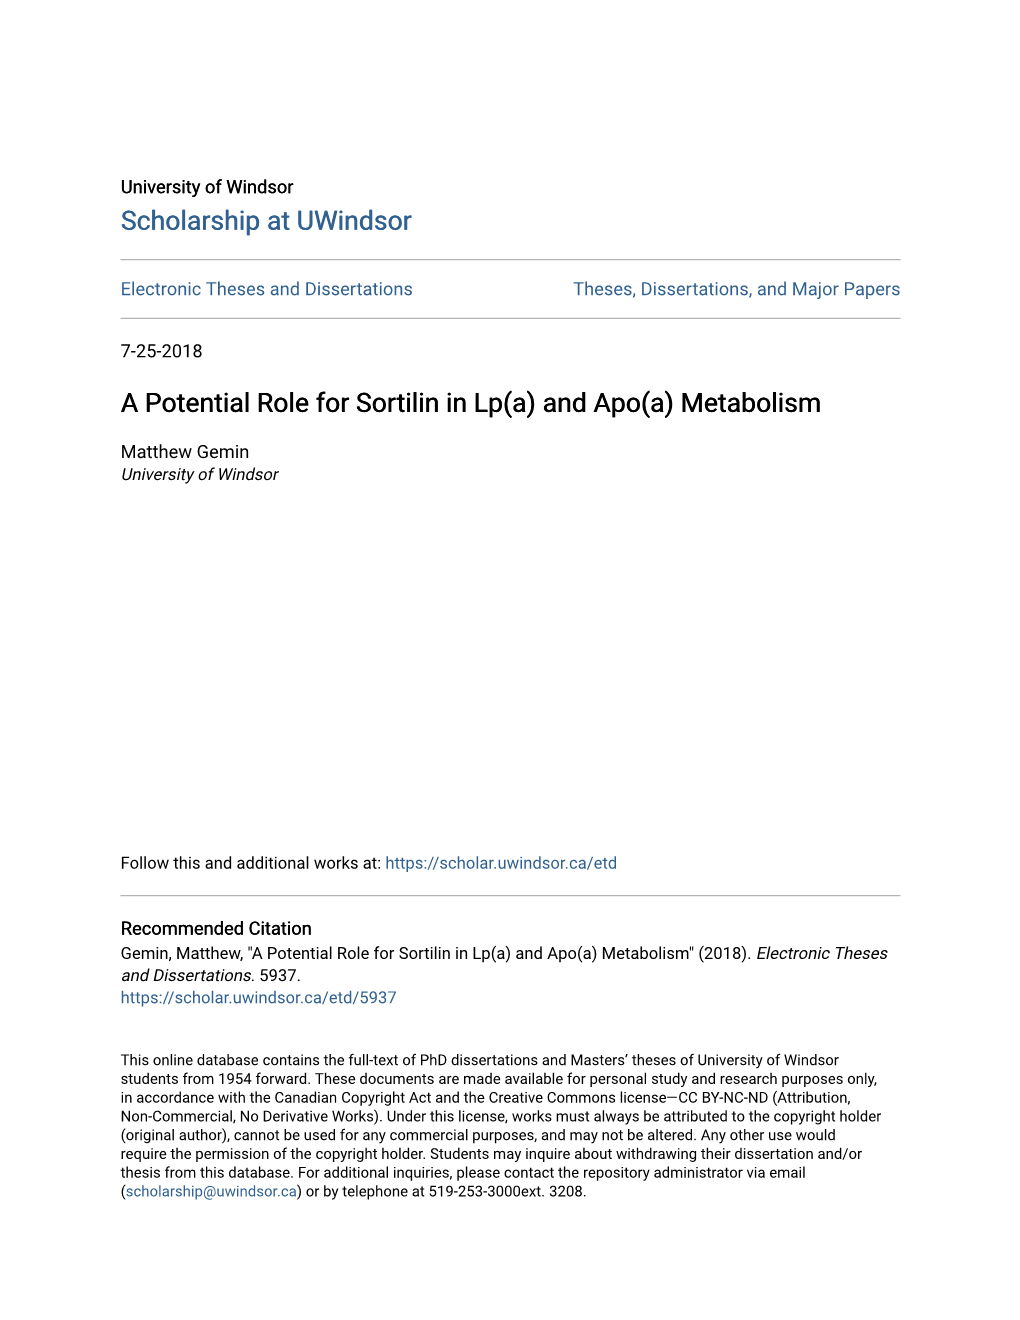 A Potential Role for Sortilin in Lp(A) and Apo(A) Metabolism